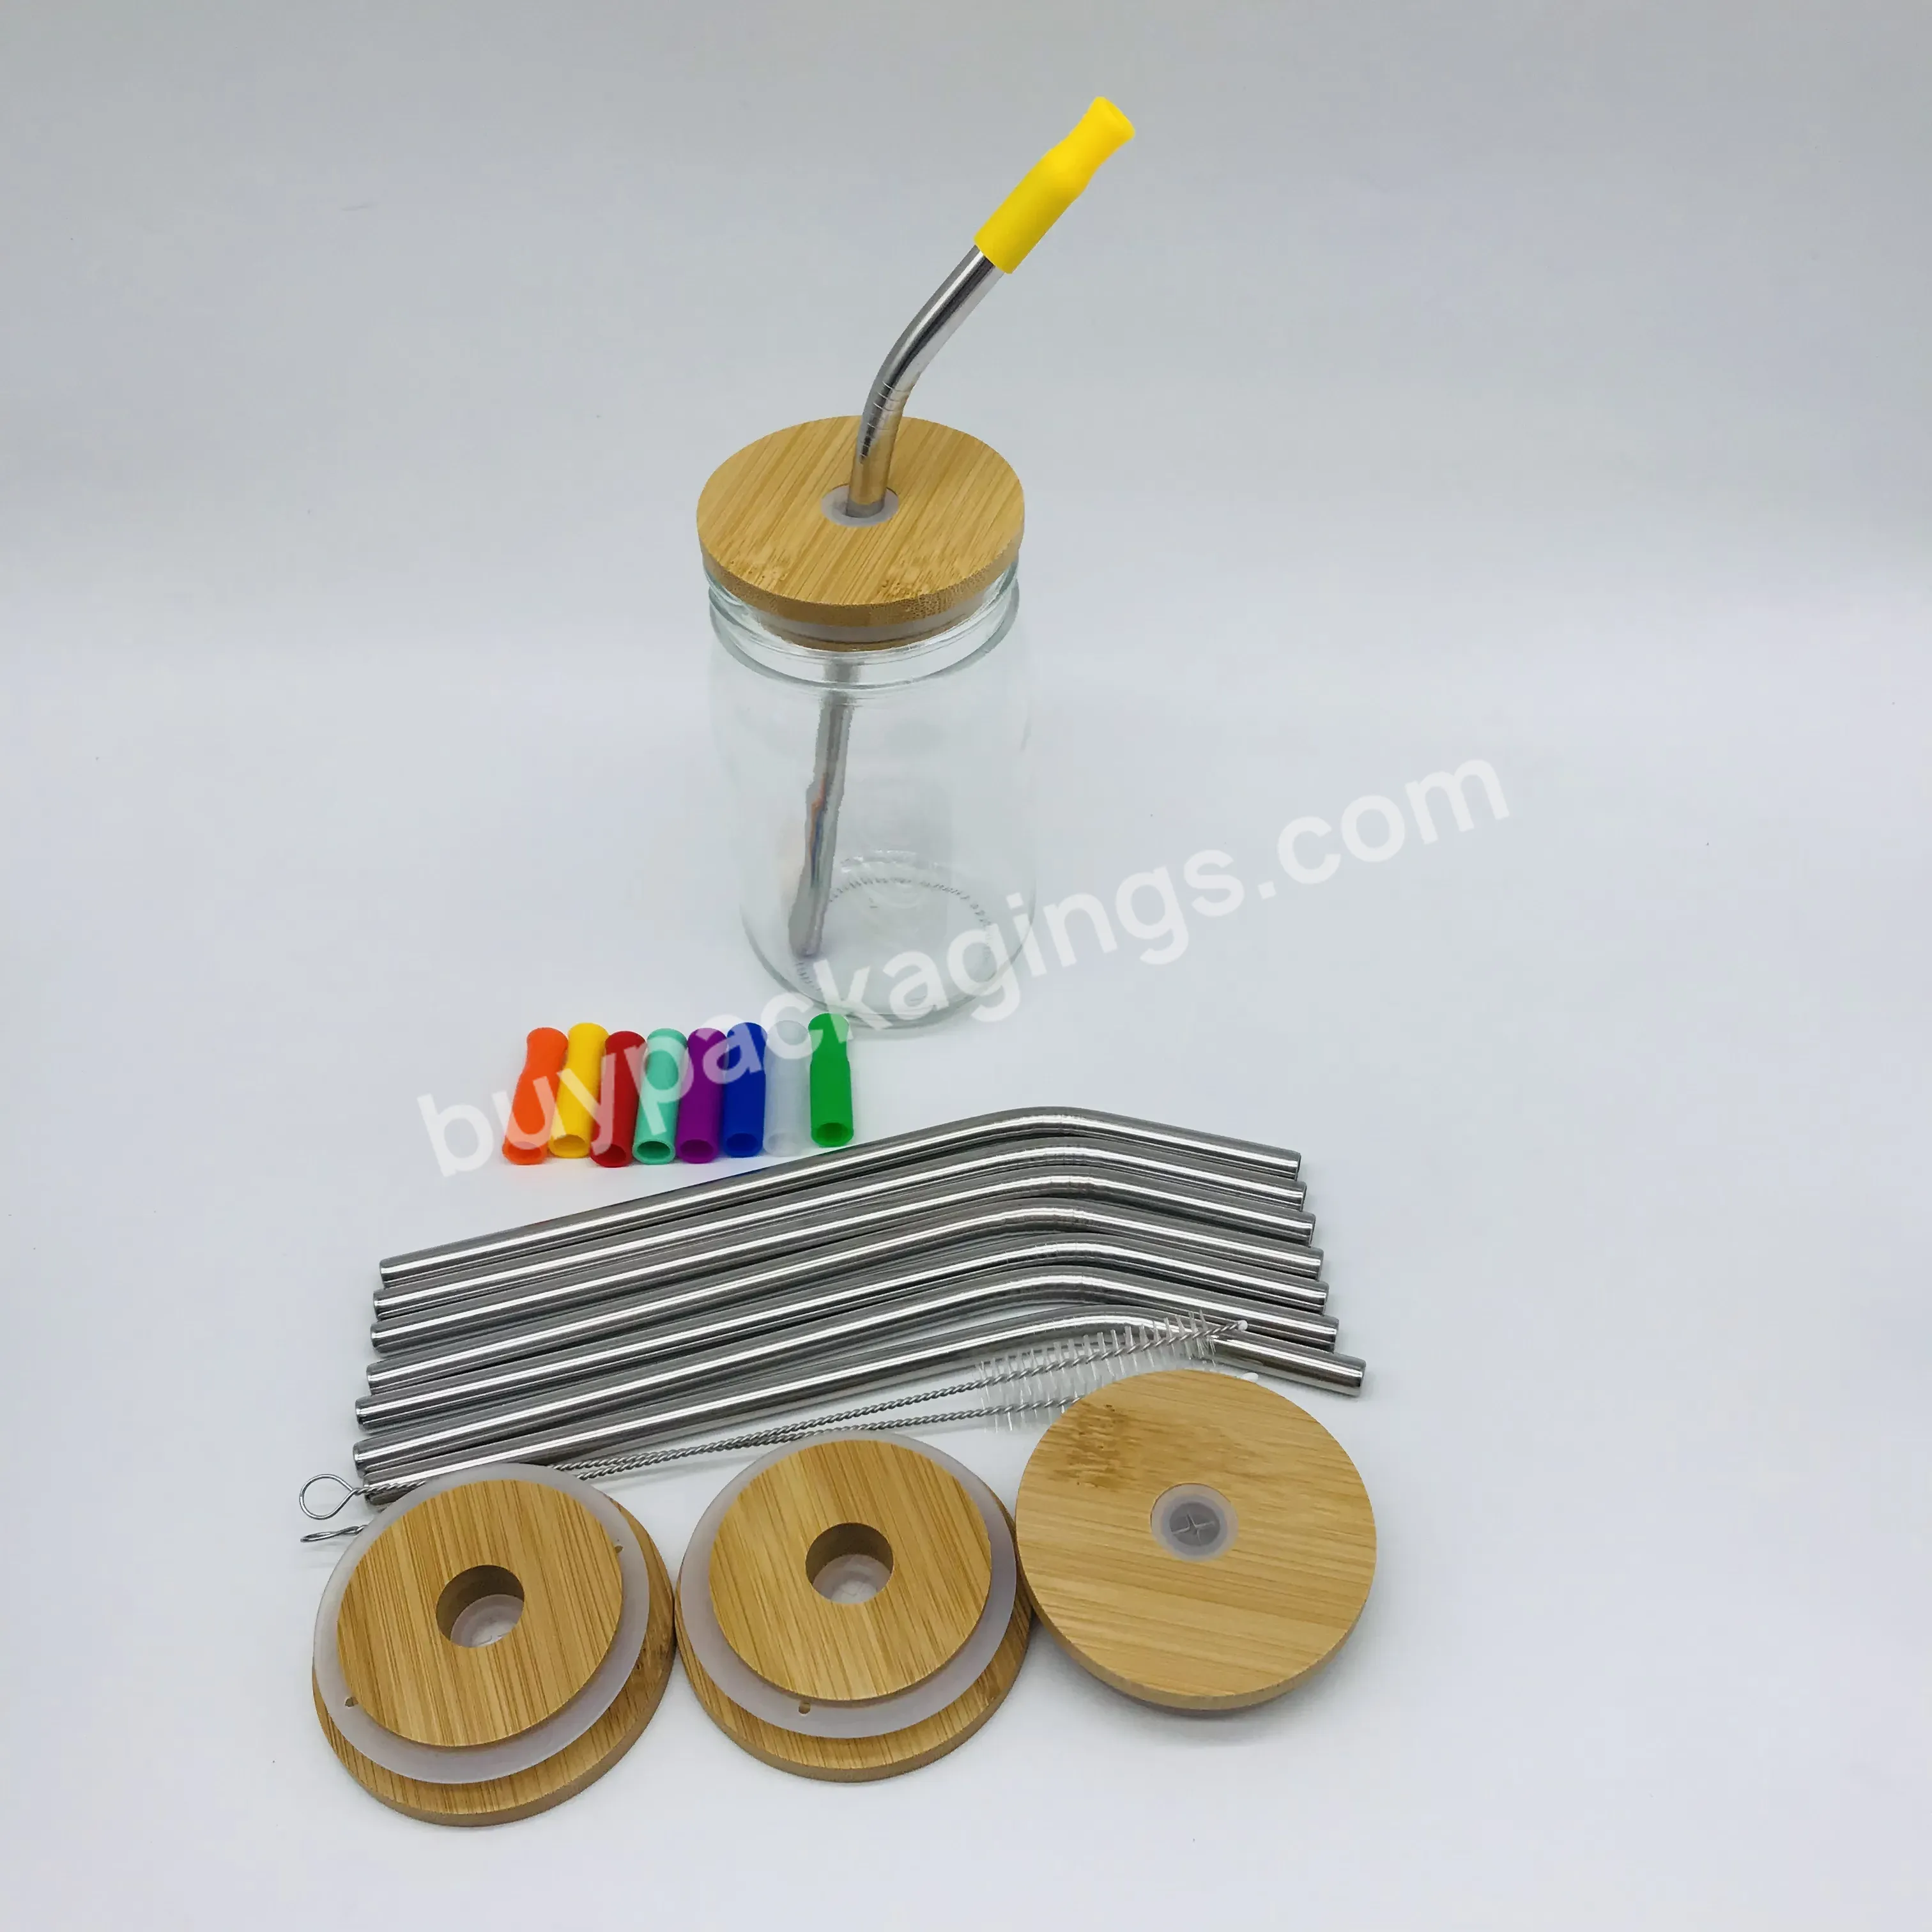 Hot Sell Bamboo Jar Lid Bamboo Lids With Straw Hole Bamboo Lids With Stainless Steel Straw For Mason Jars - Buy Bamboo Jar Lid,Bamboo Lids With Straw Hole,Bamboo Lids For Mason Jars.